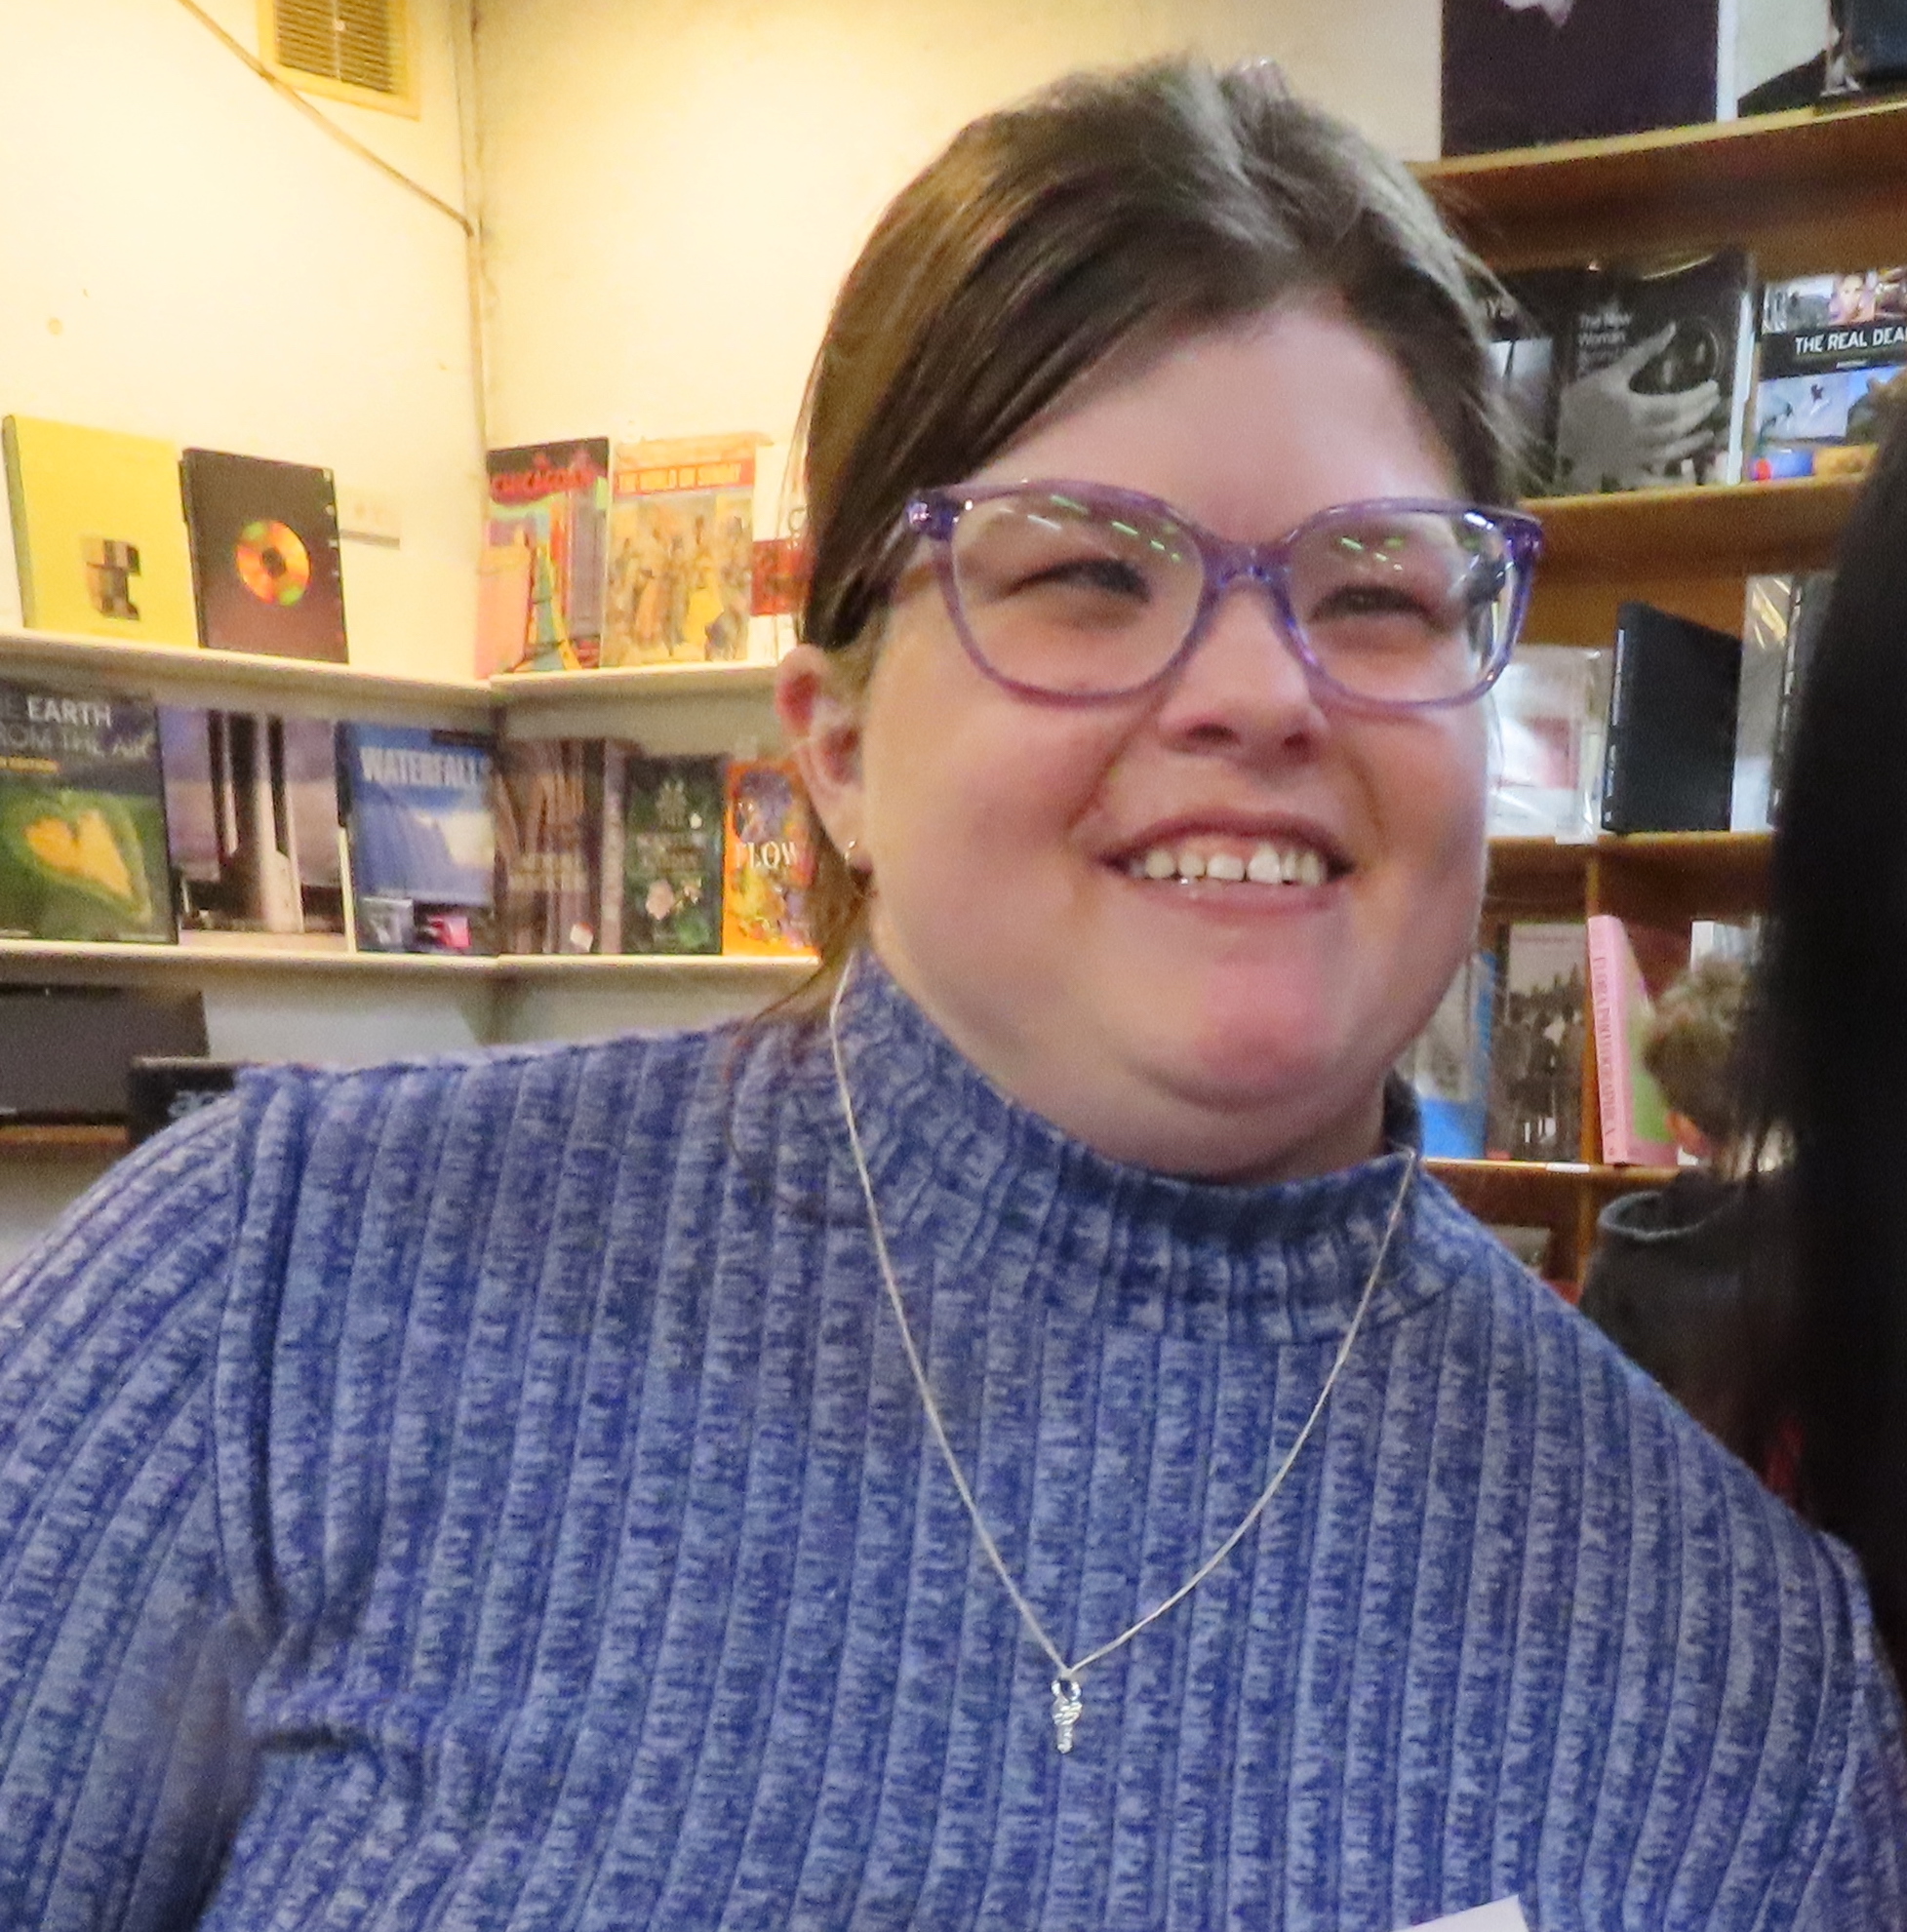 Image of Ashleigh with purple glasses standing in a bookshop. She has a long sleeved blue top on and has brown hair, and she is white.